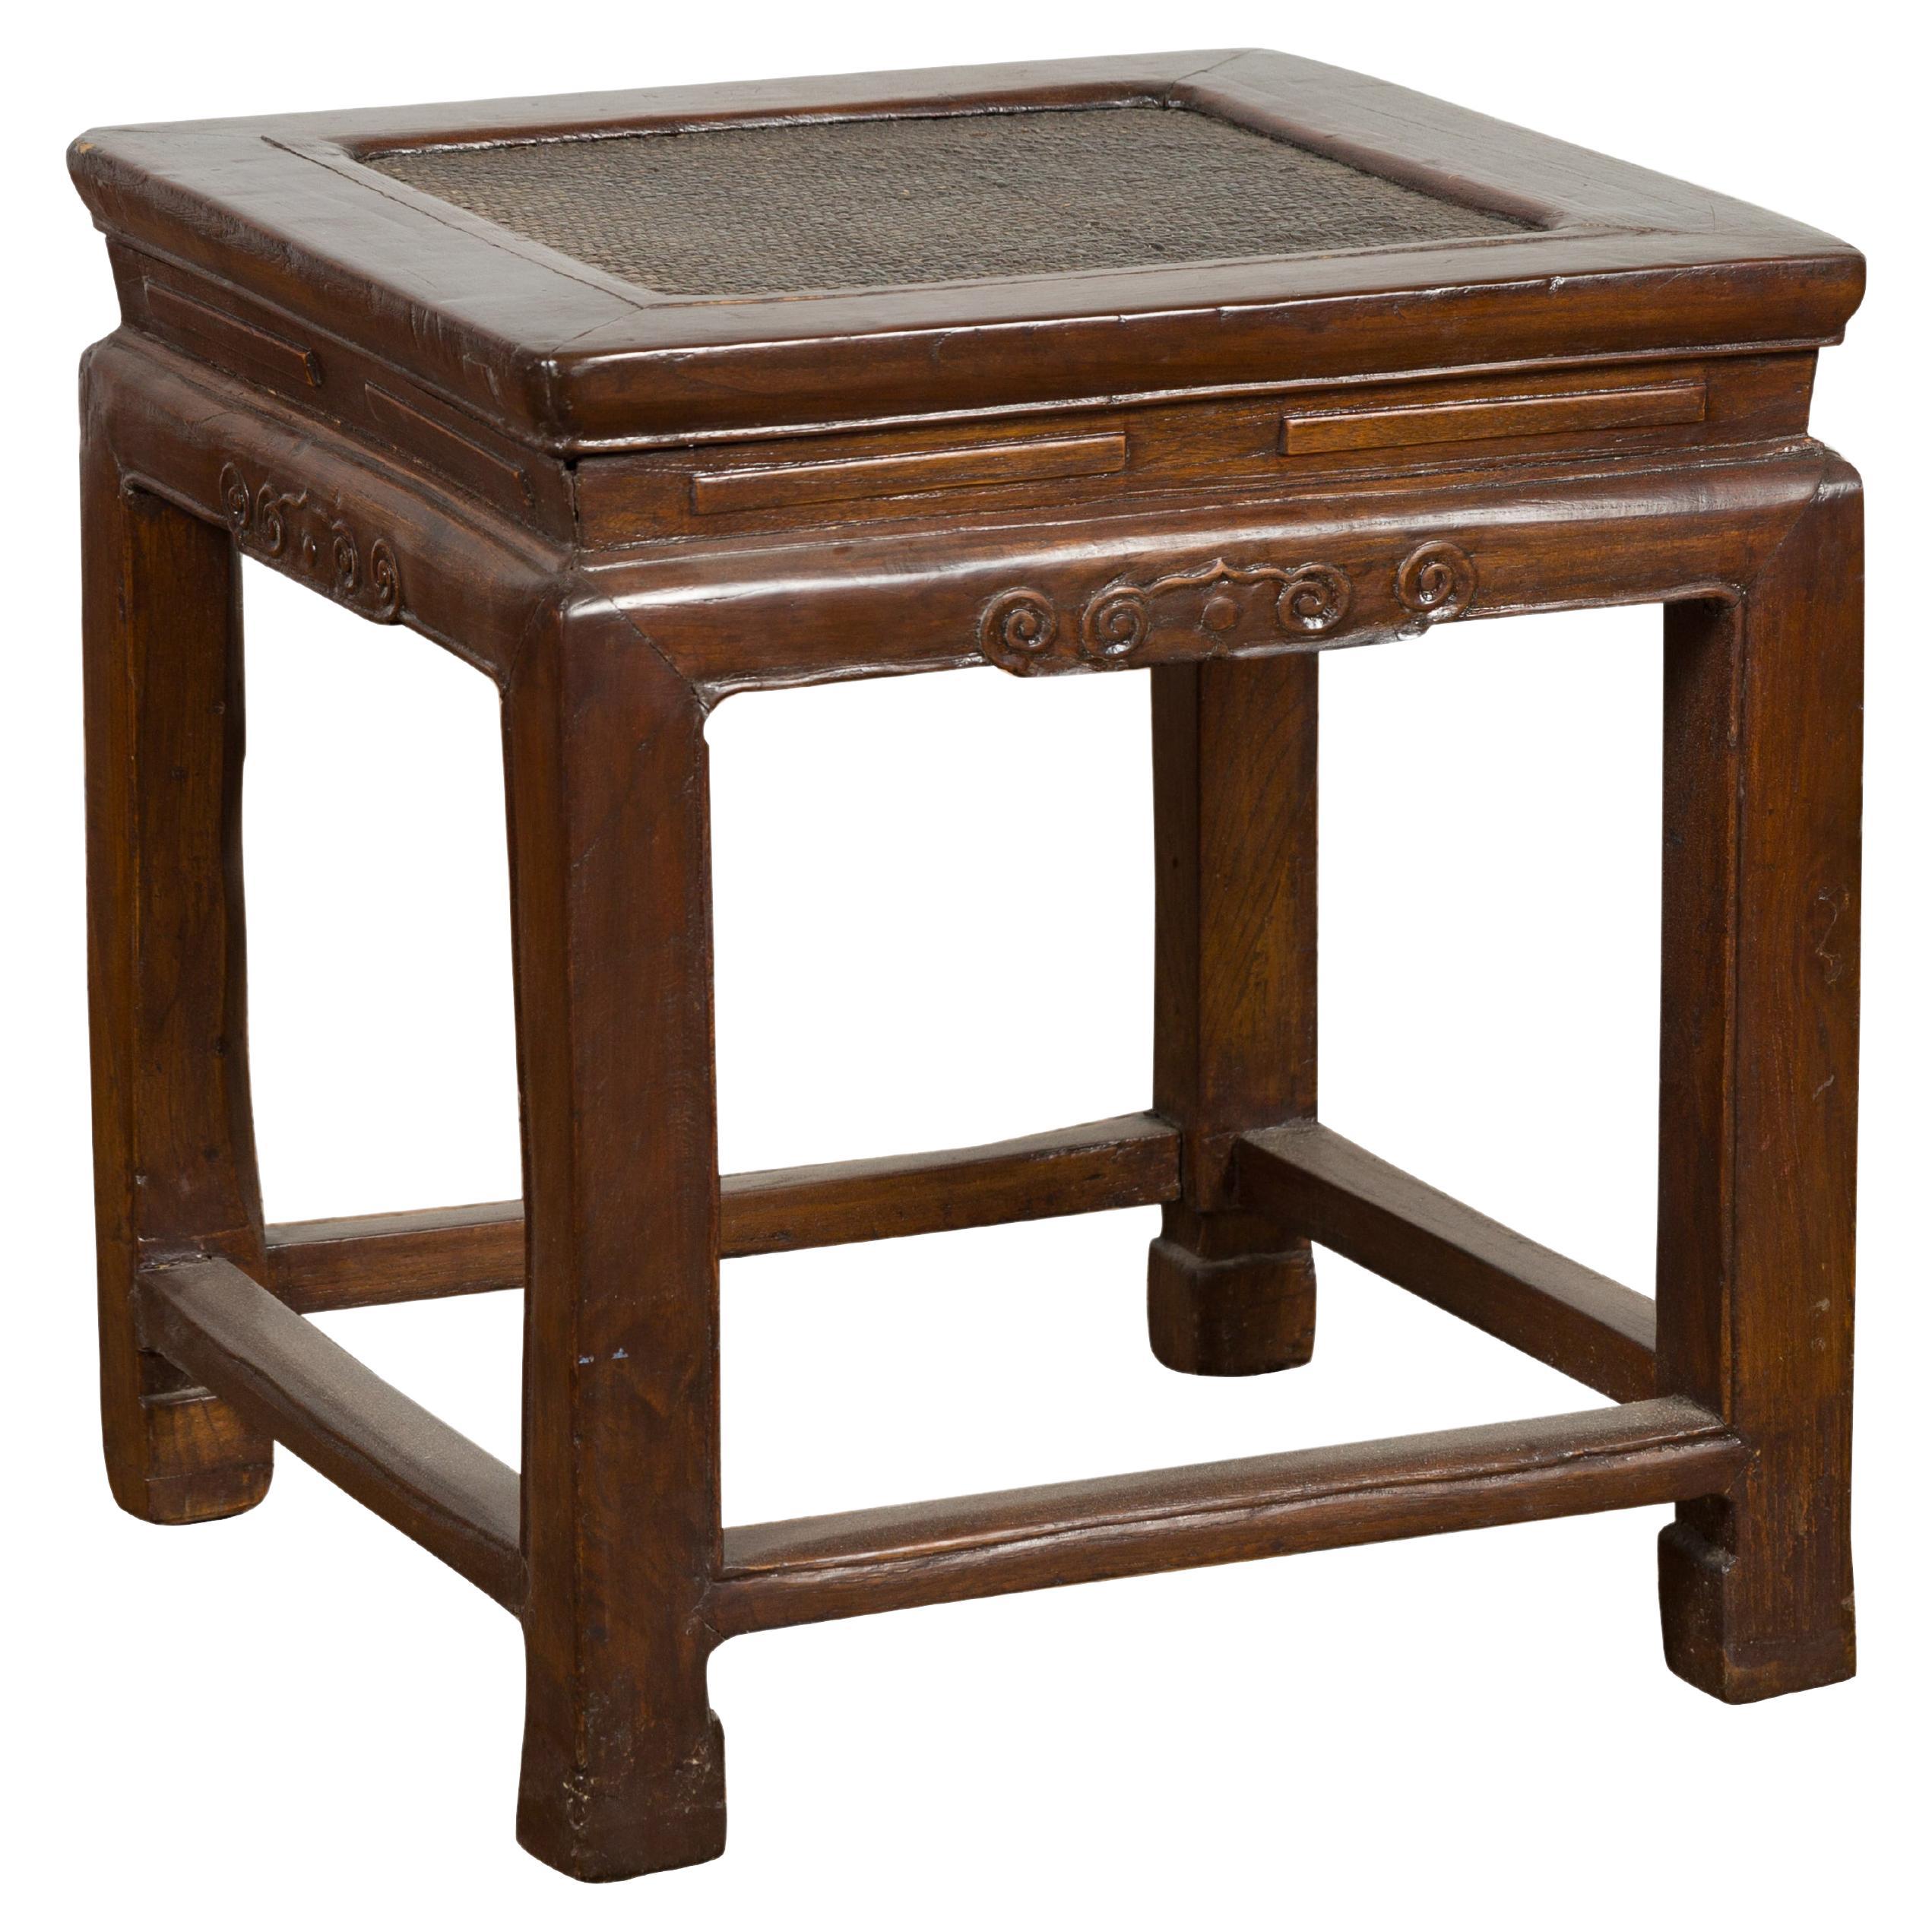 Side Table with Rattan Inset Top, Carved Apron and Horsehoof Feet